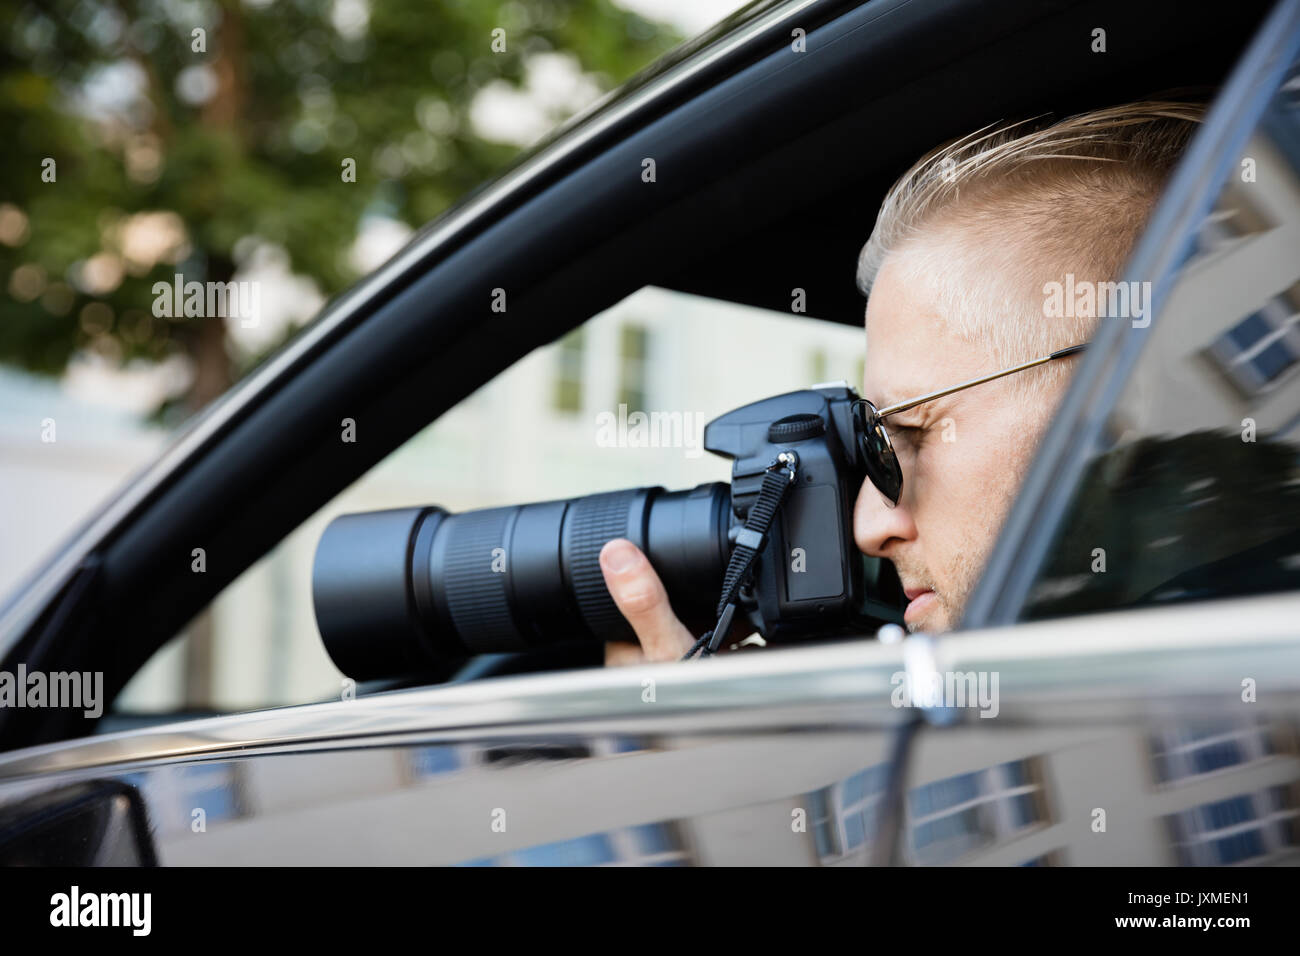 Paparazzi Sitting Inside Car Photographing With SLR Camera Stock Photo